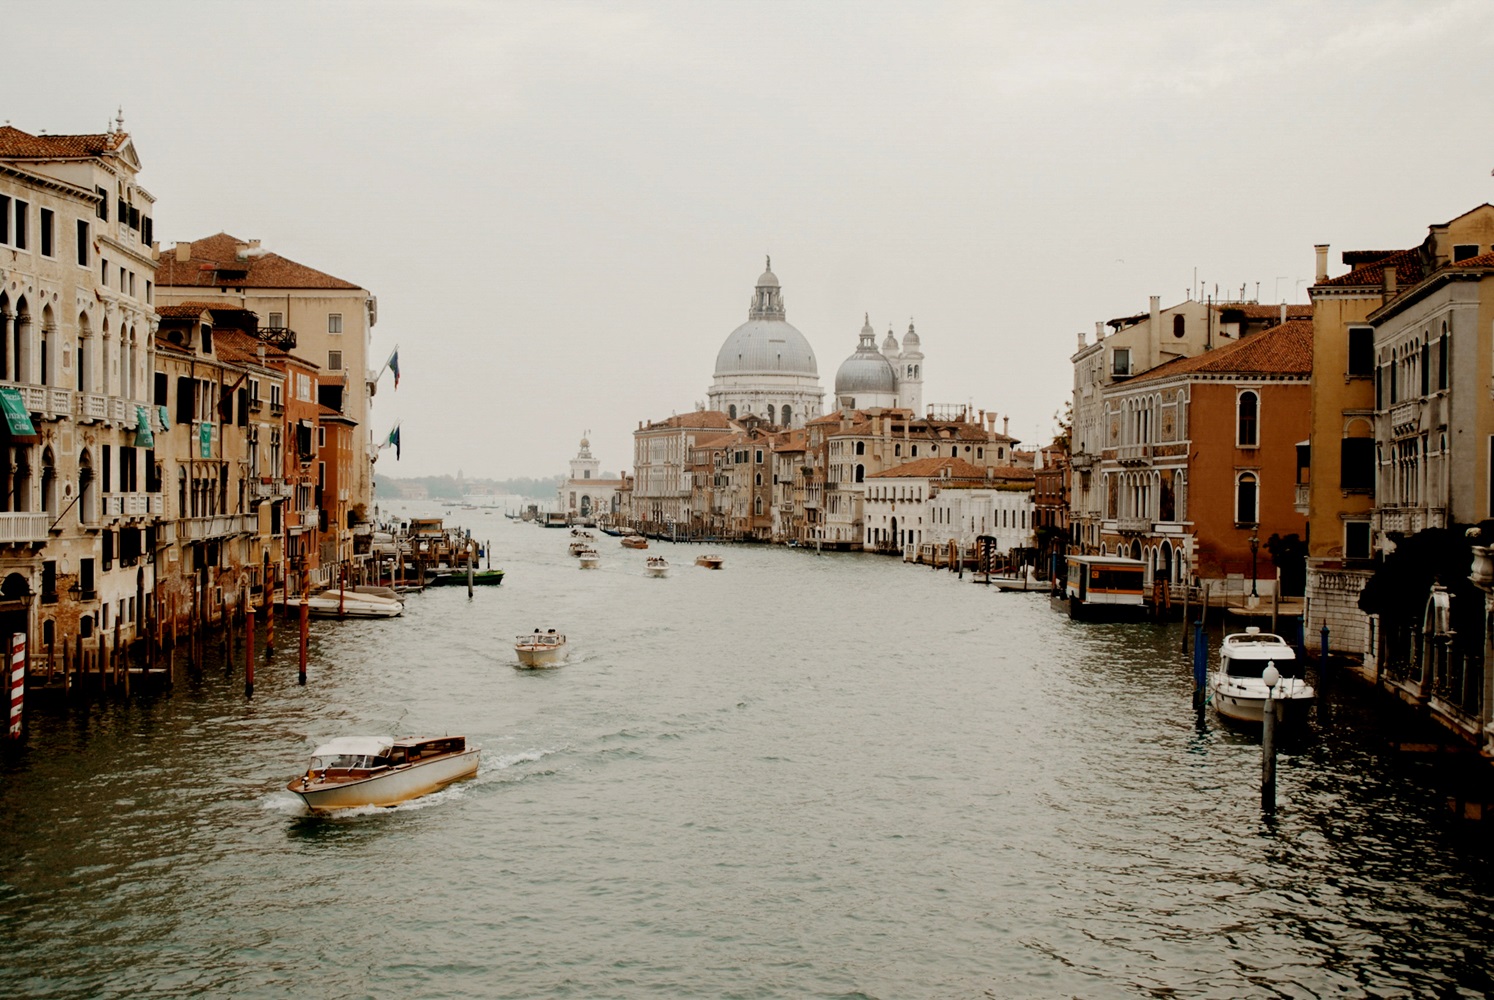 One day in Venice - A Photo Love Story